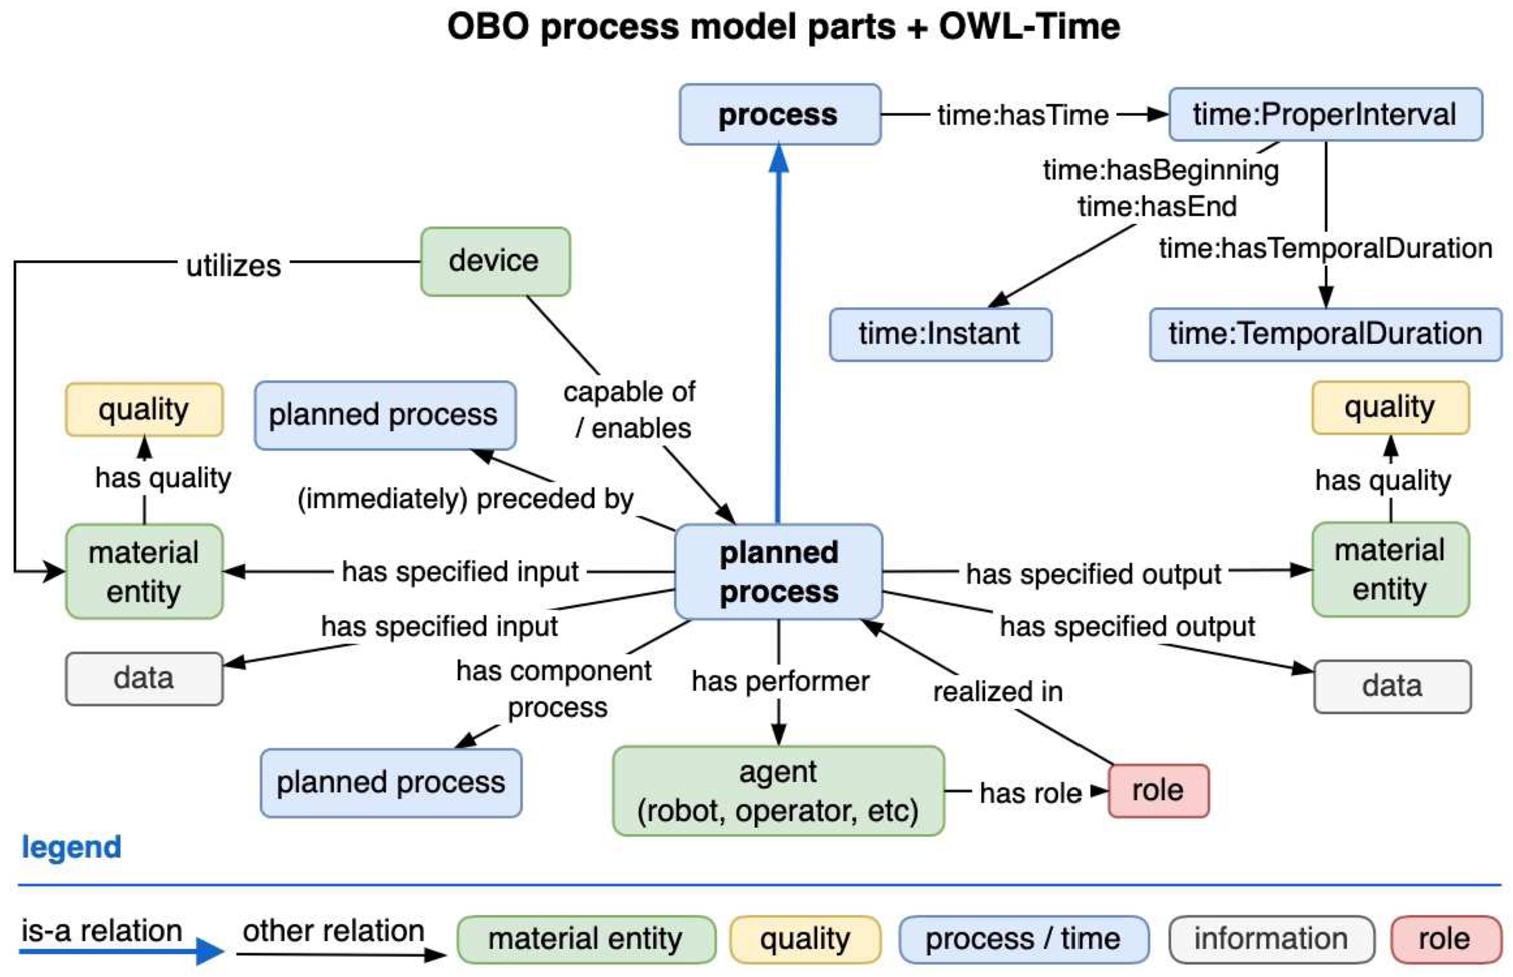 OBO + OWL-time process modelling. Inputs and outputs can have qualities (or characteristics) attached to them which can change from input to output.